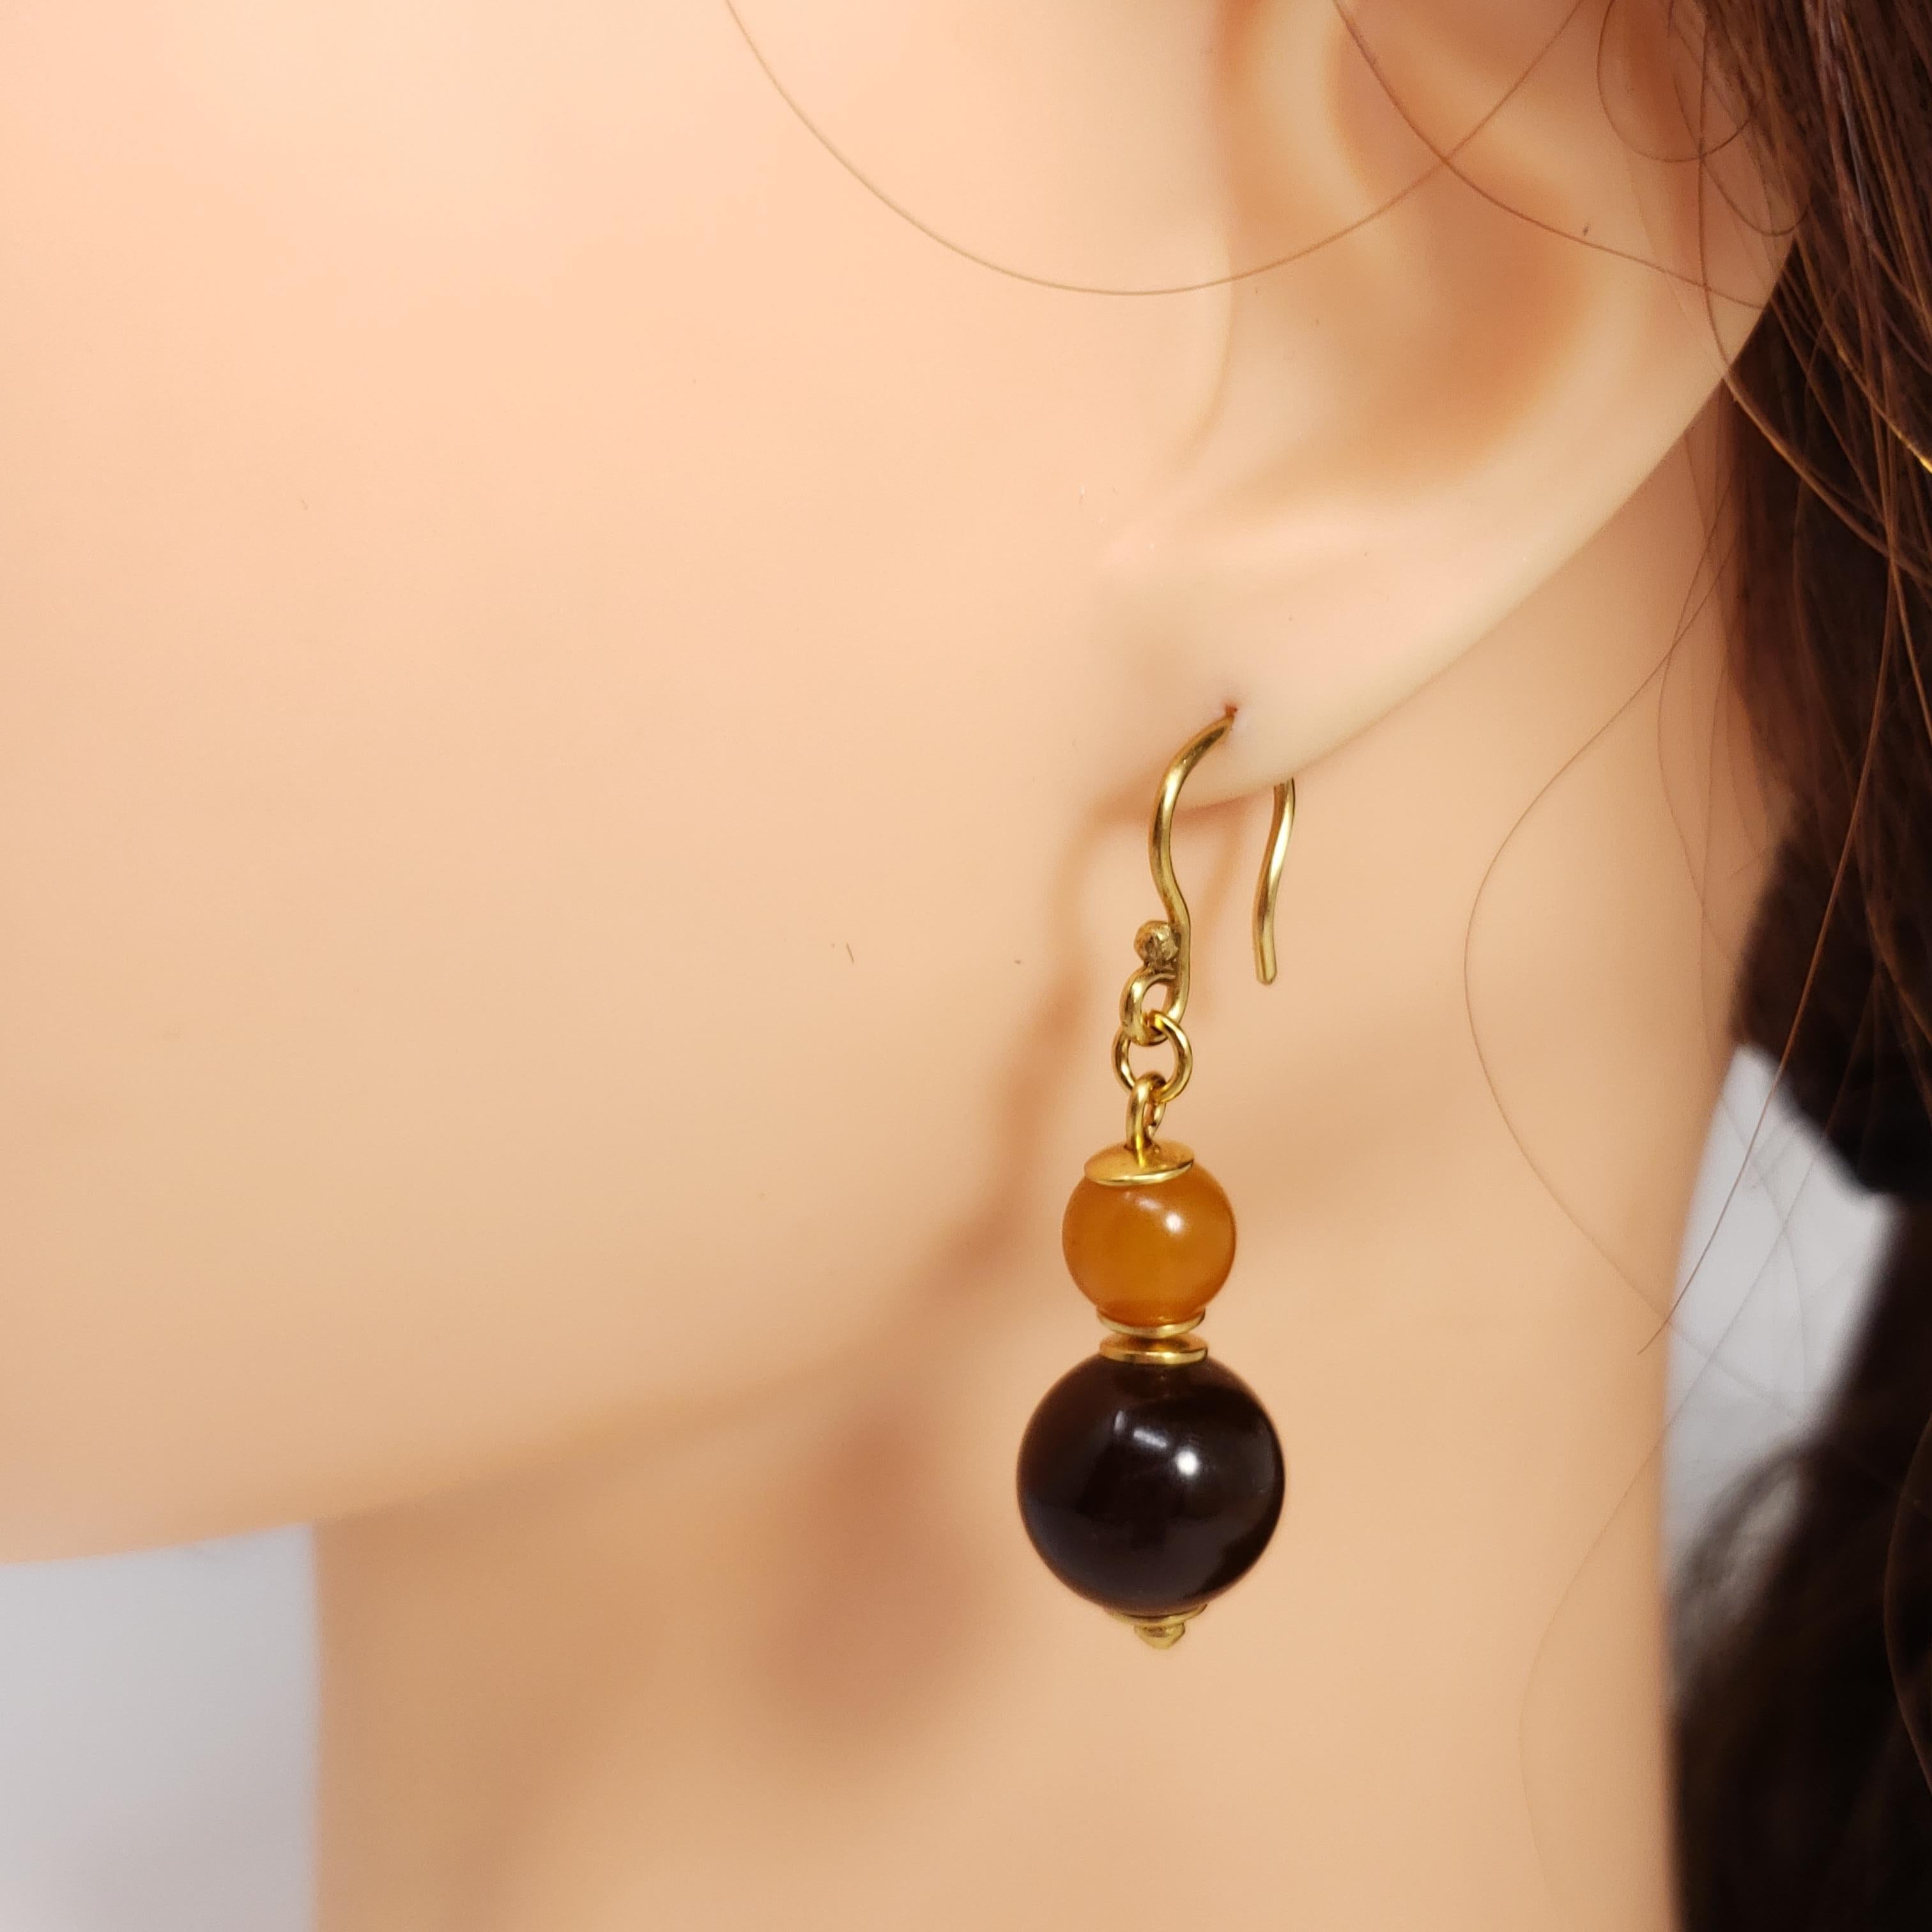 Art Deco Russian Orange Baltic Amber Bead Dangling Earrings in Gold, Early to Mid 1900s For Sale